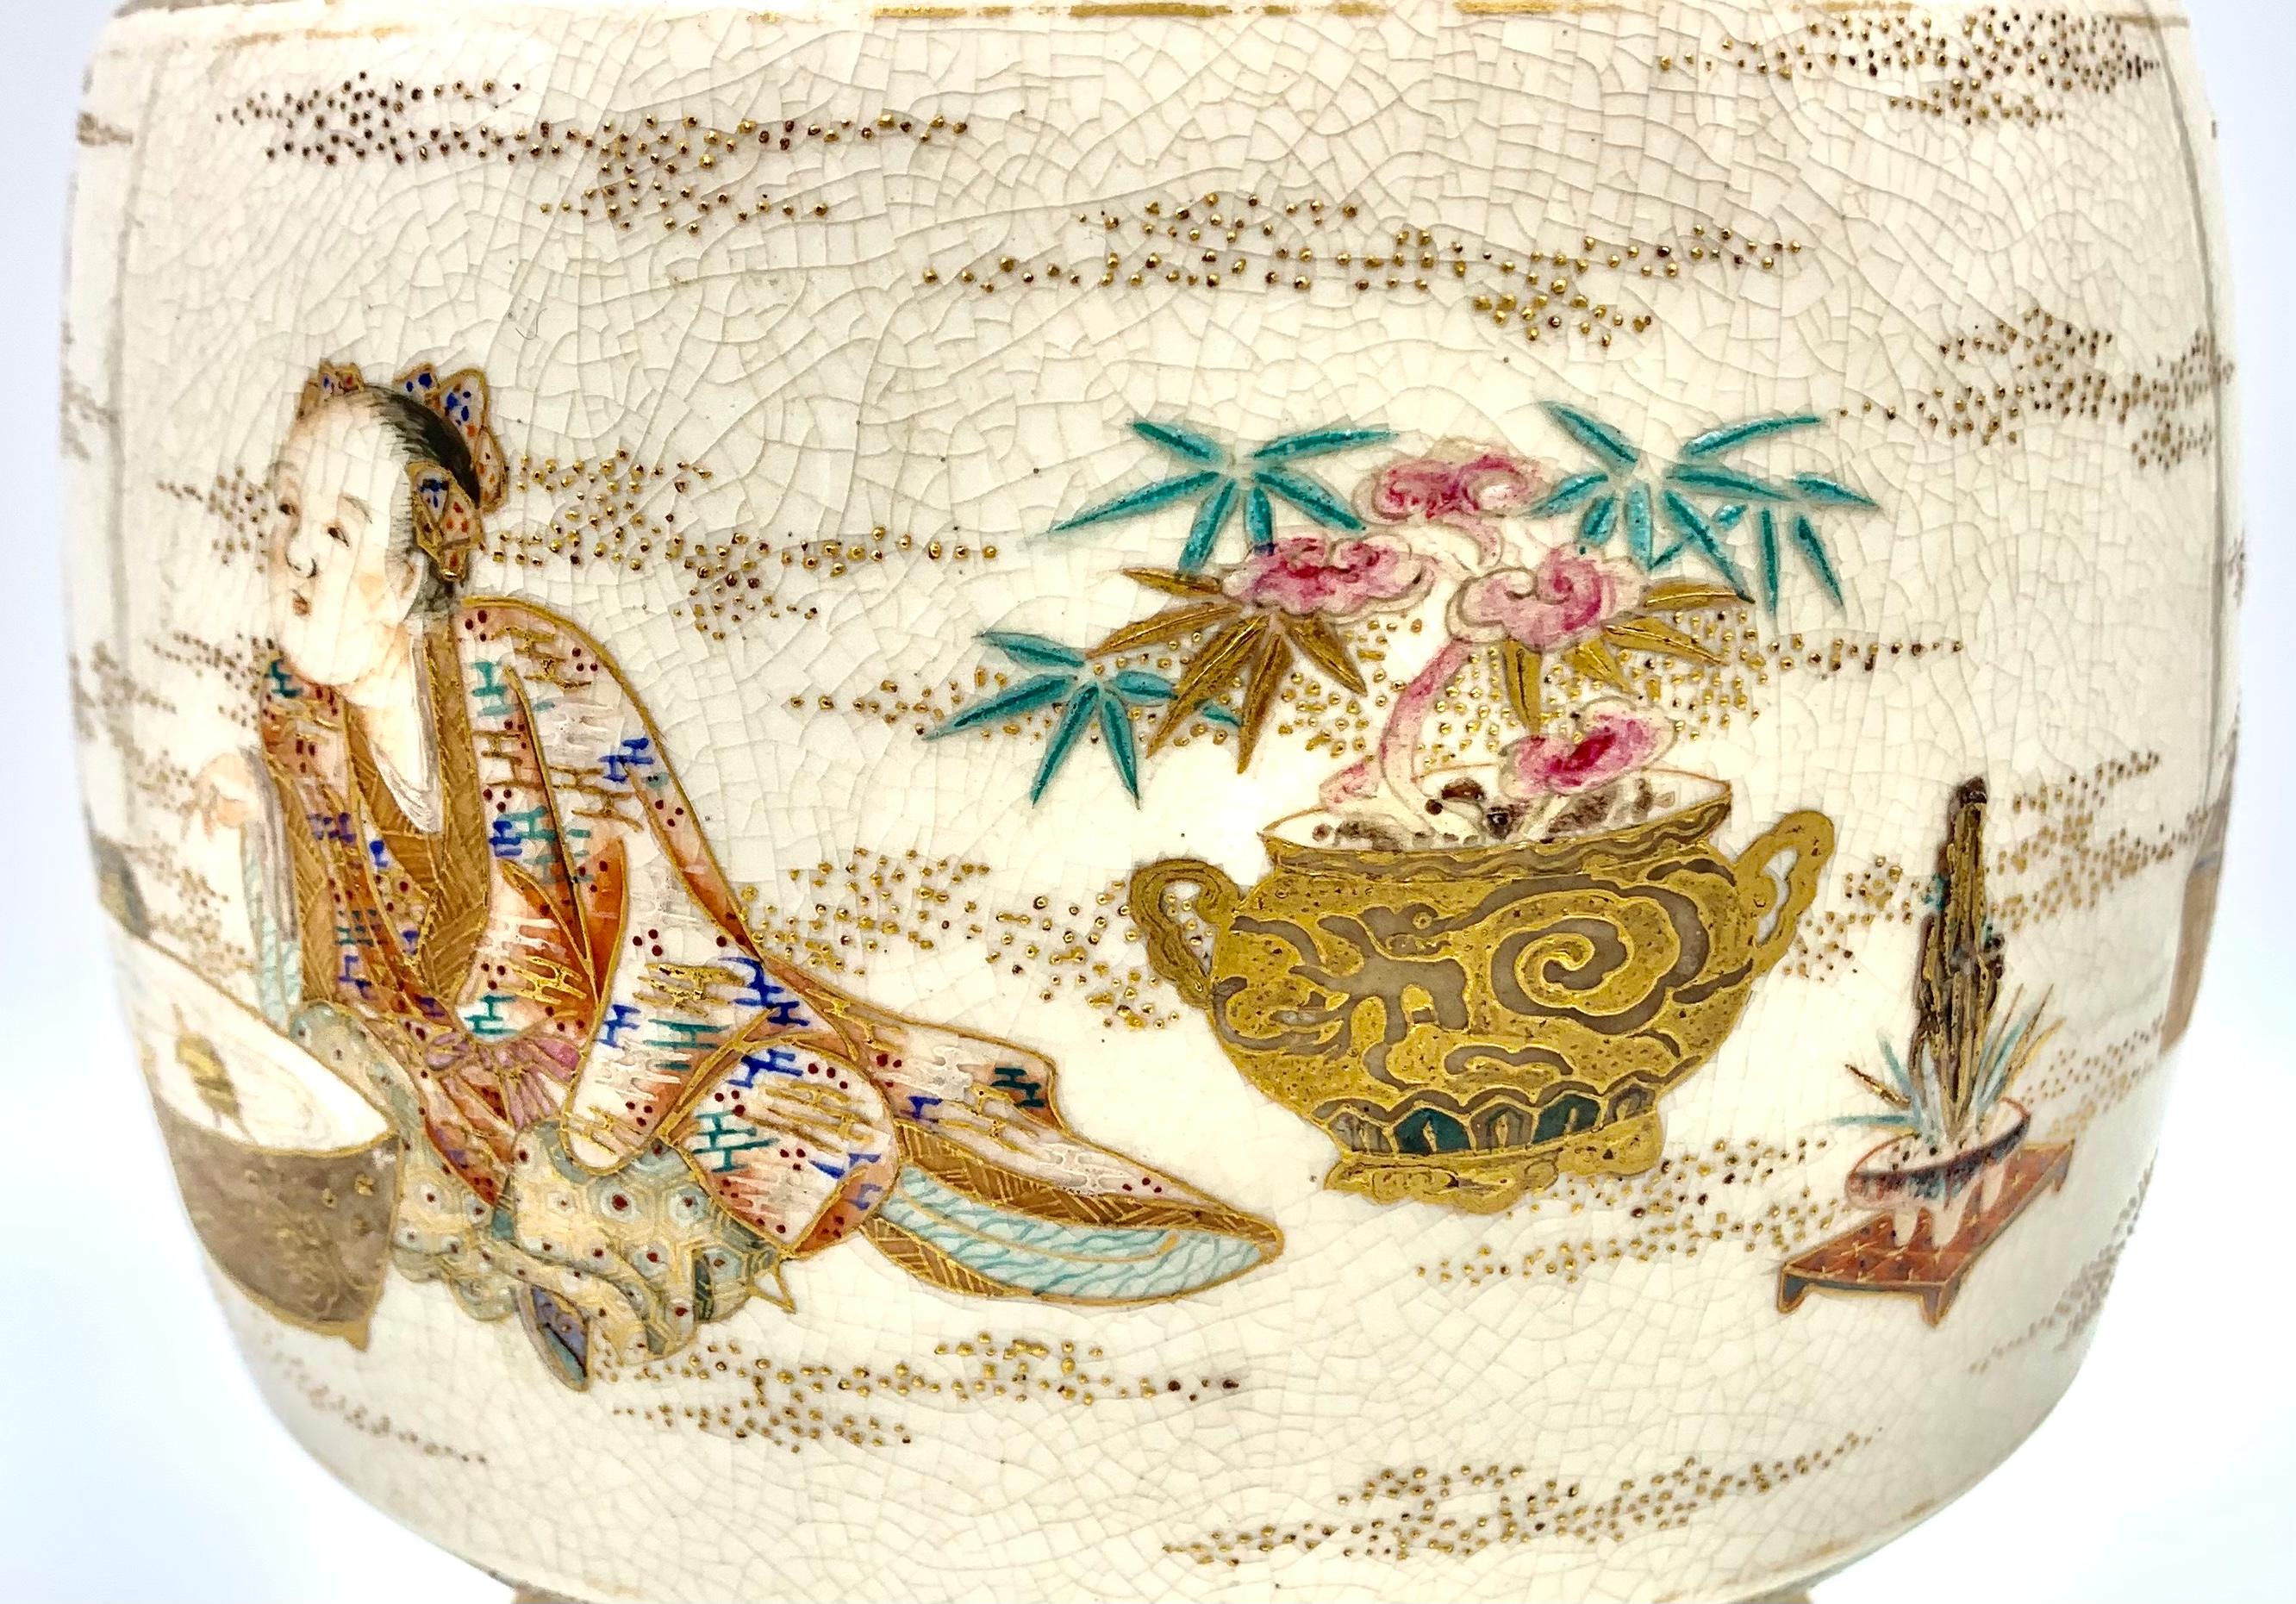 Rare Antique Japanese Satsuma Vase with Scenes of Figures, Turtle Basin, Reading In Good Condition For Sale In New York, NY